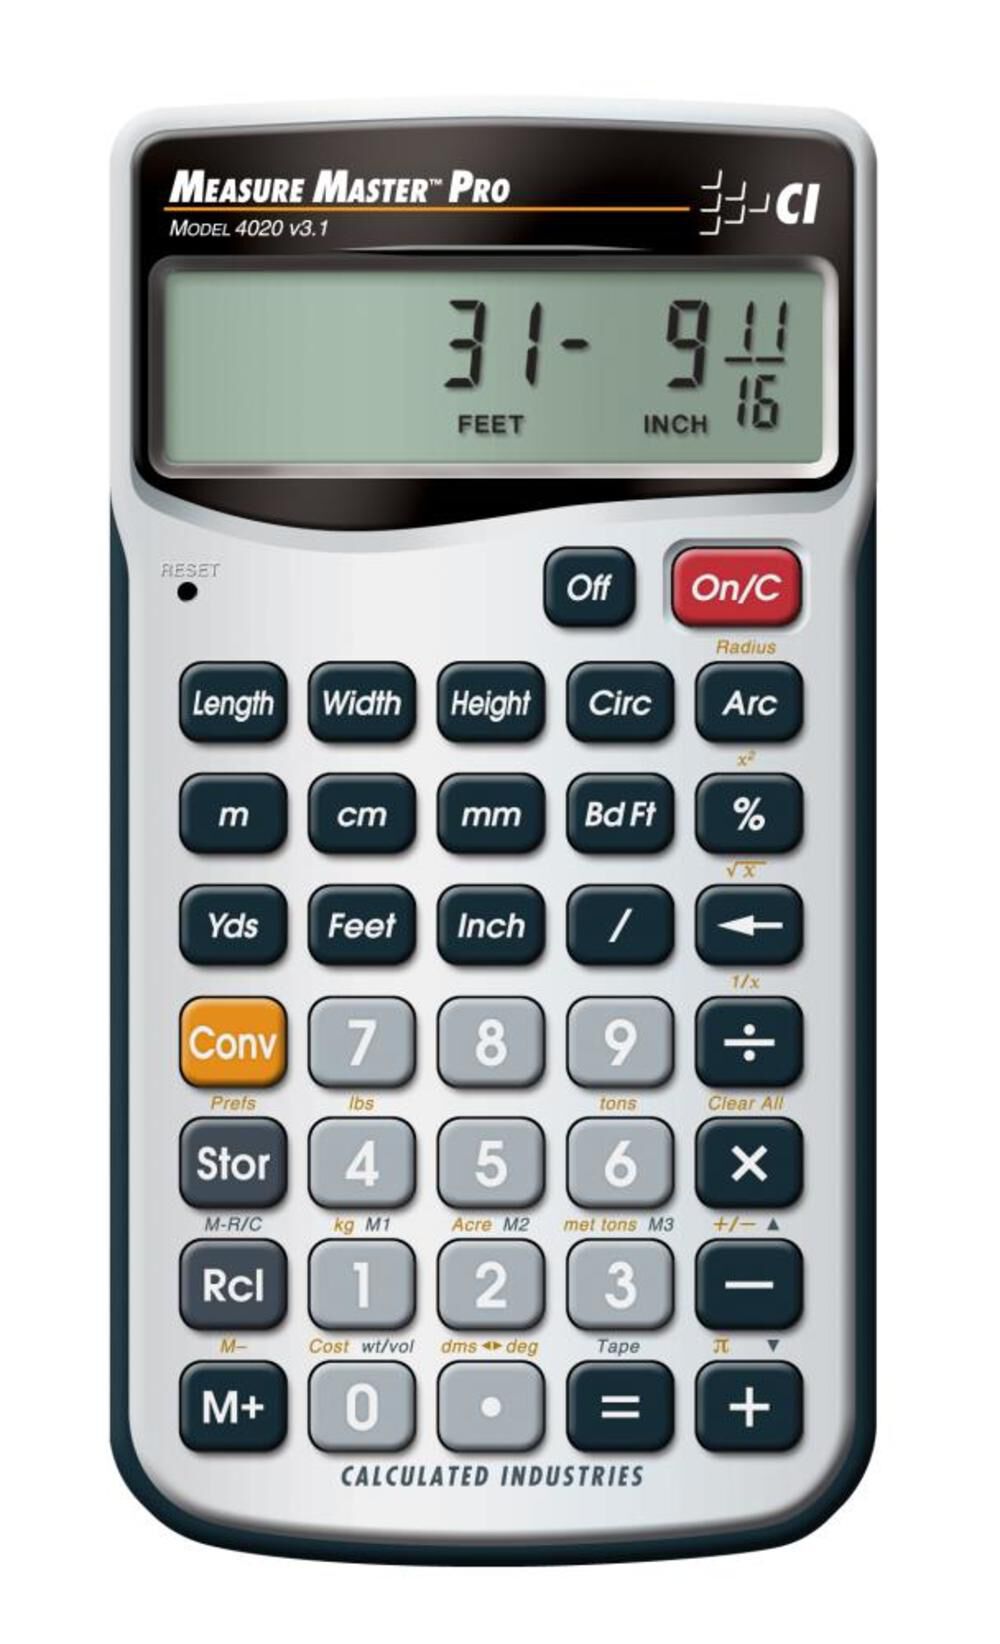 Measure Master Pro Feet-Inch-Fraction and Metric Calculator 4020